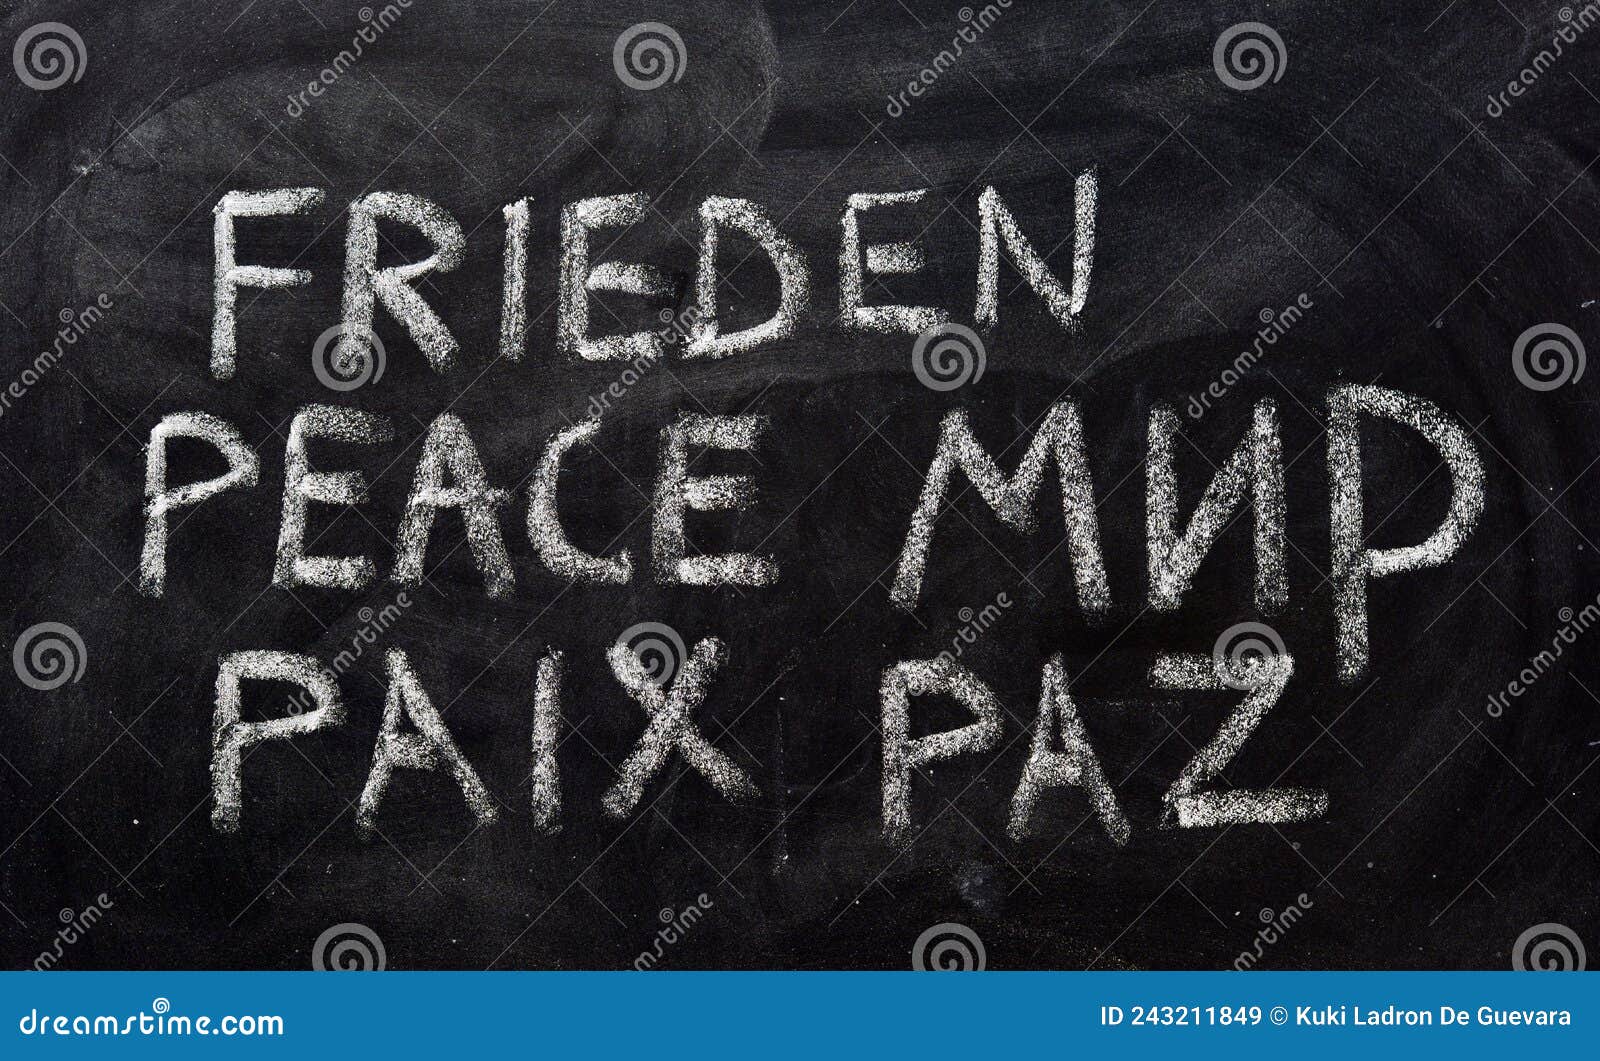 the word peace, written in several languages